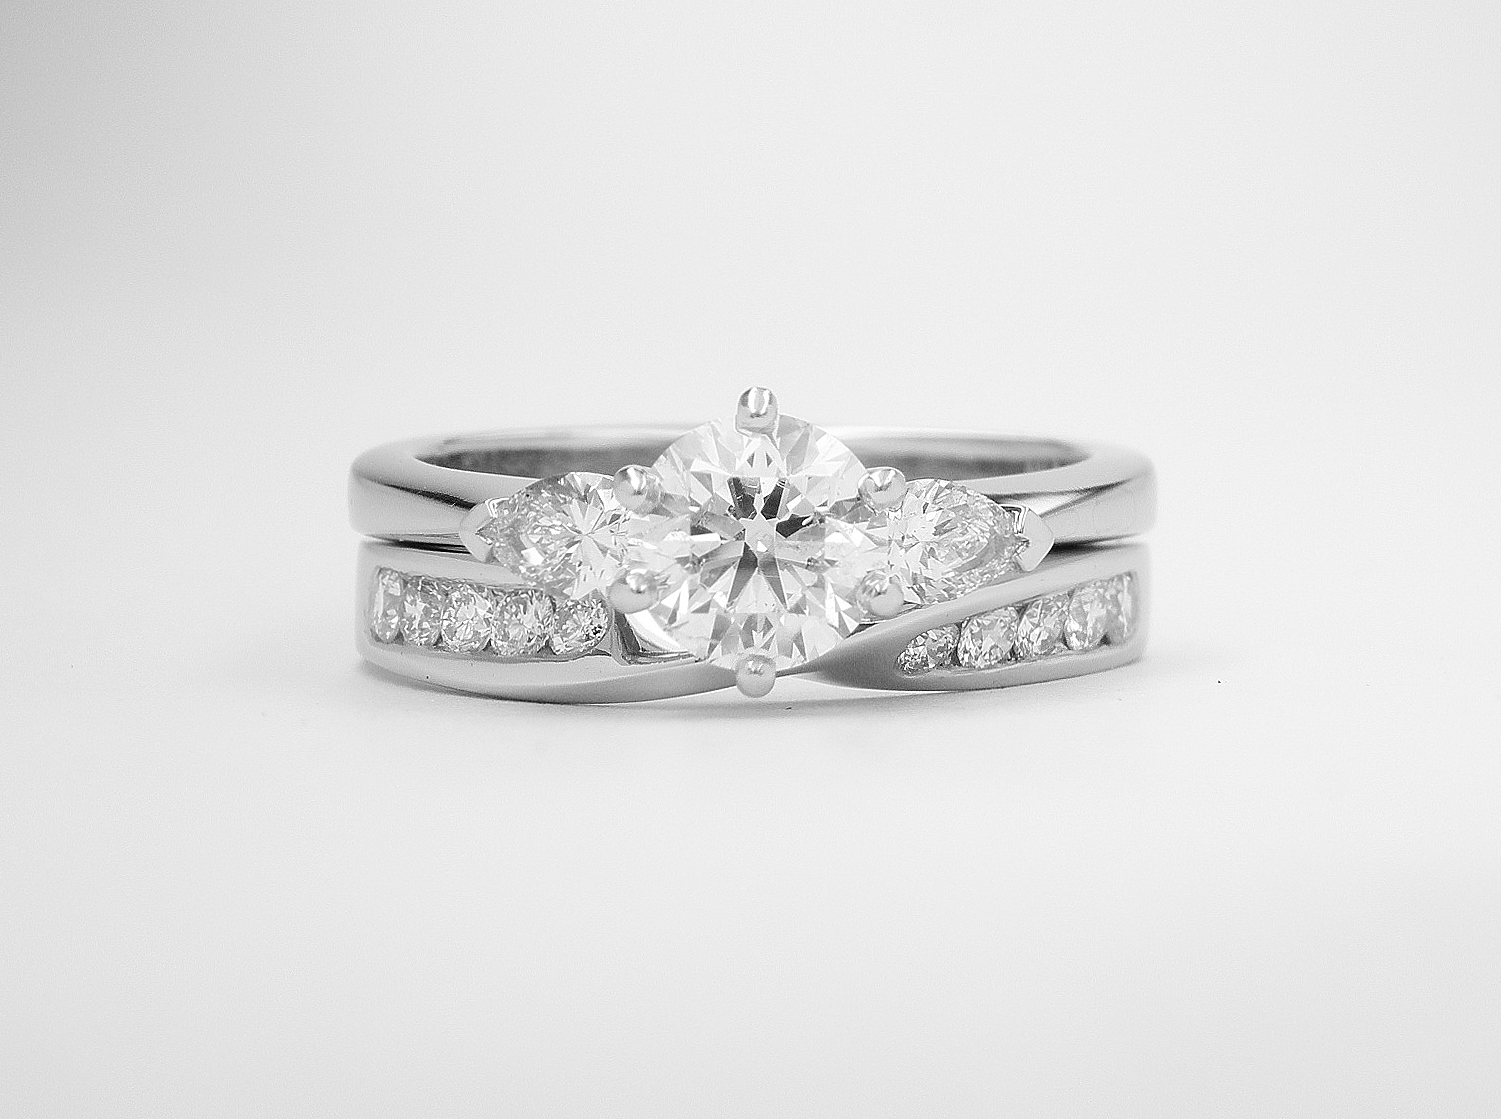 Diamond set 'twist' palladium wedding ring shaped to fit with a single stone diamond ring with pear diamond shoulders. This will fit with a single stone ring.